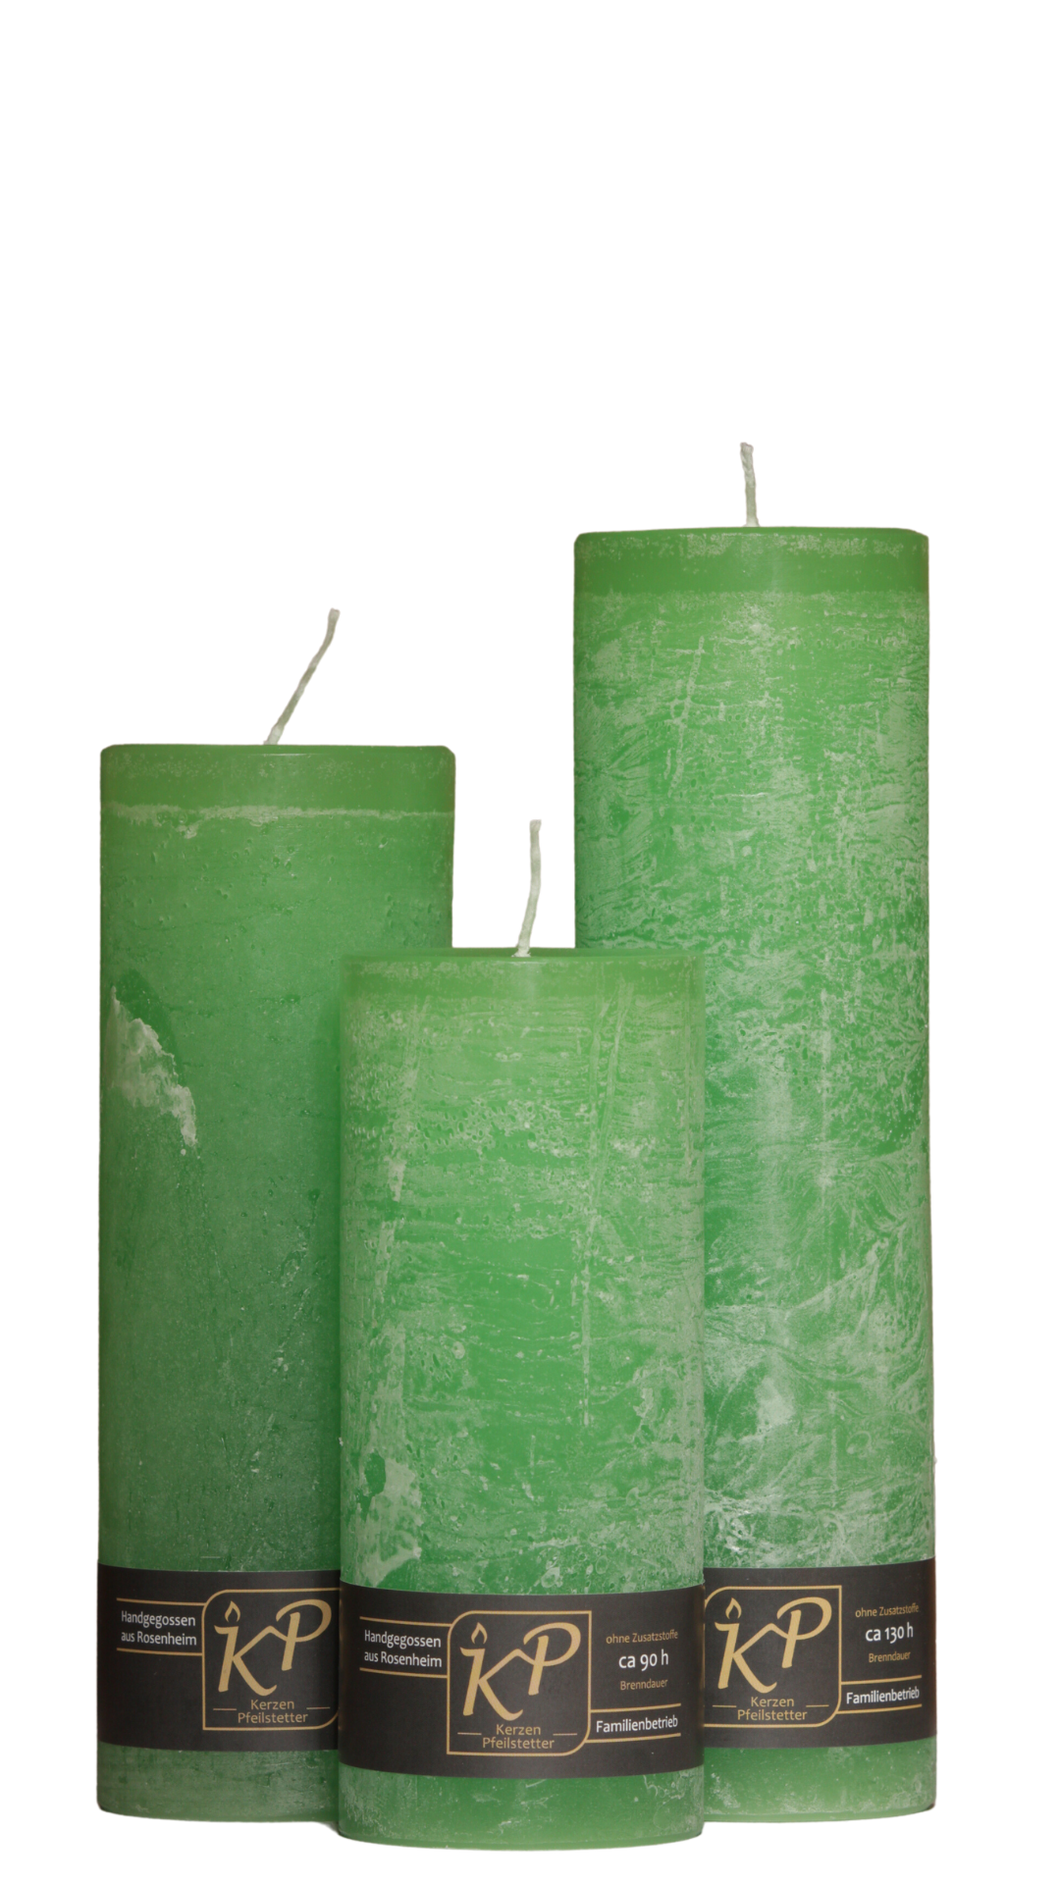 Dalina flower candle | lime green | ~ 130h burning time